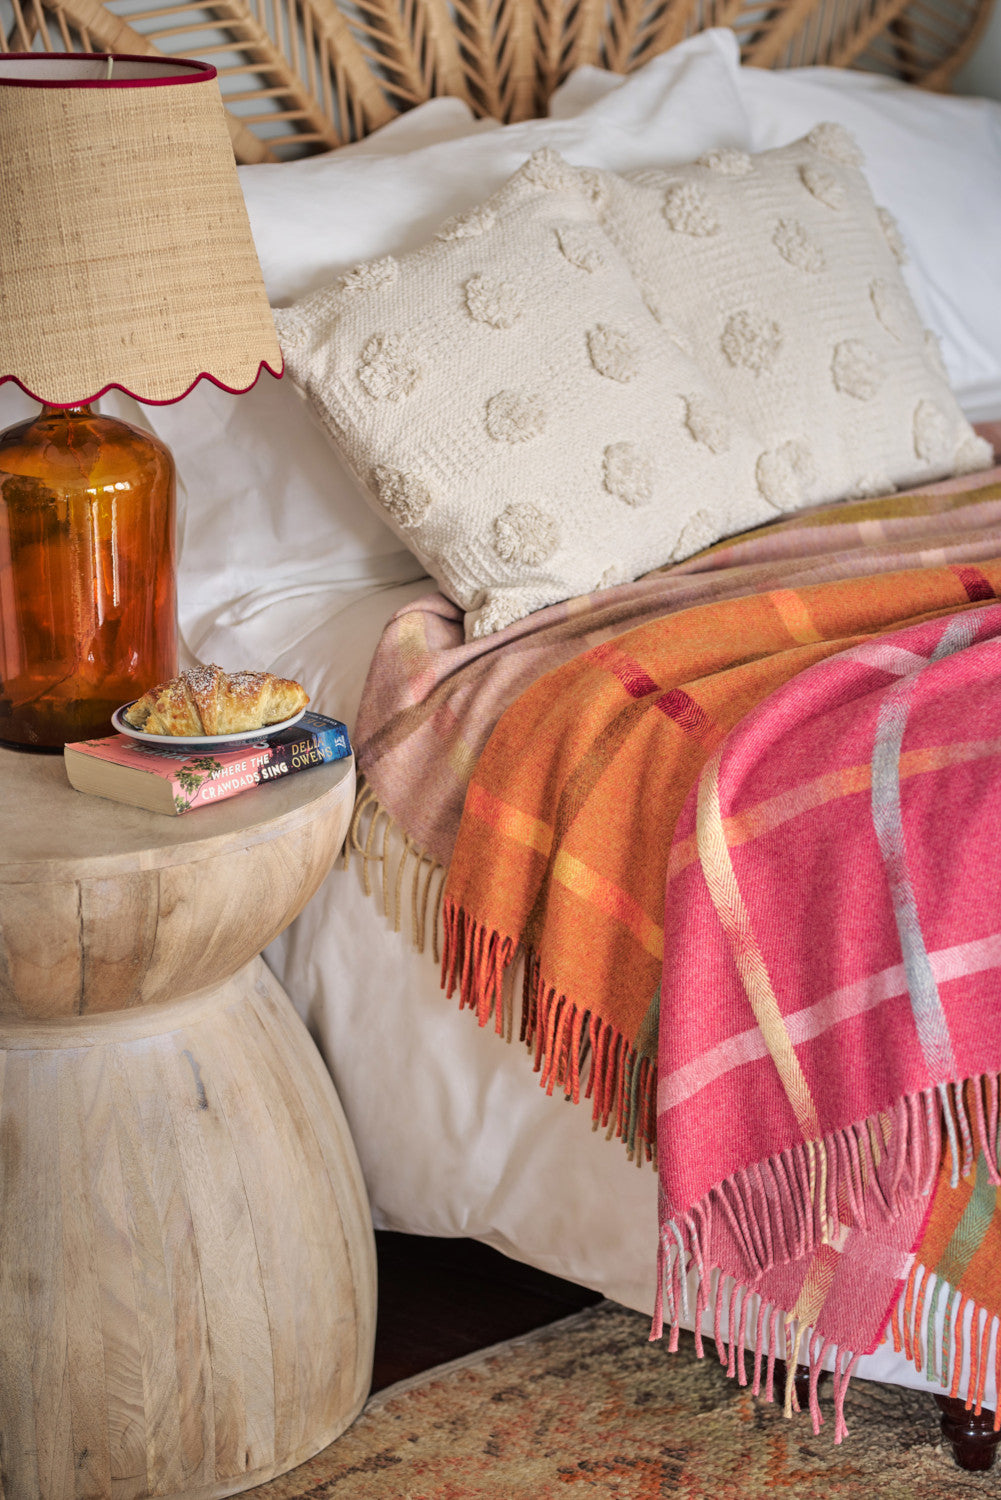 Three Garden Flowers merino lambswool blankets in pink, orange, and red draped over a bed on the right. A bedside table with a lamp, book, and pastries is on the left